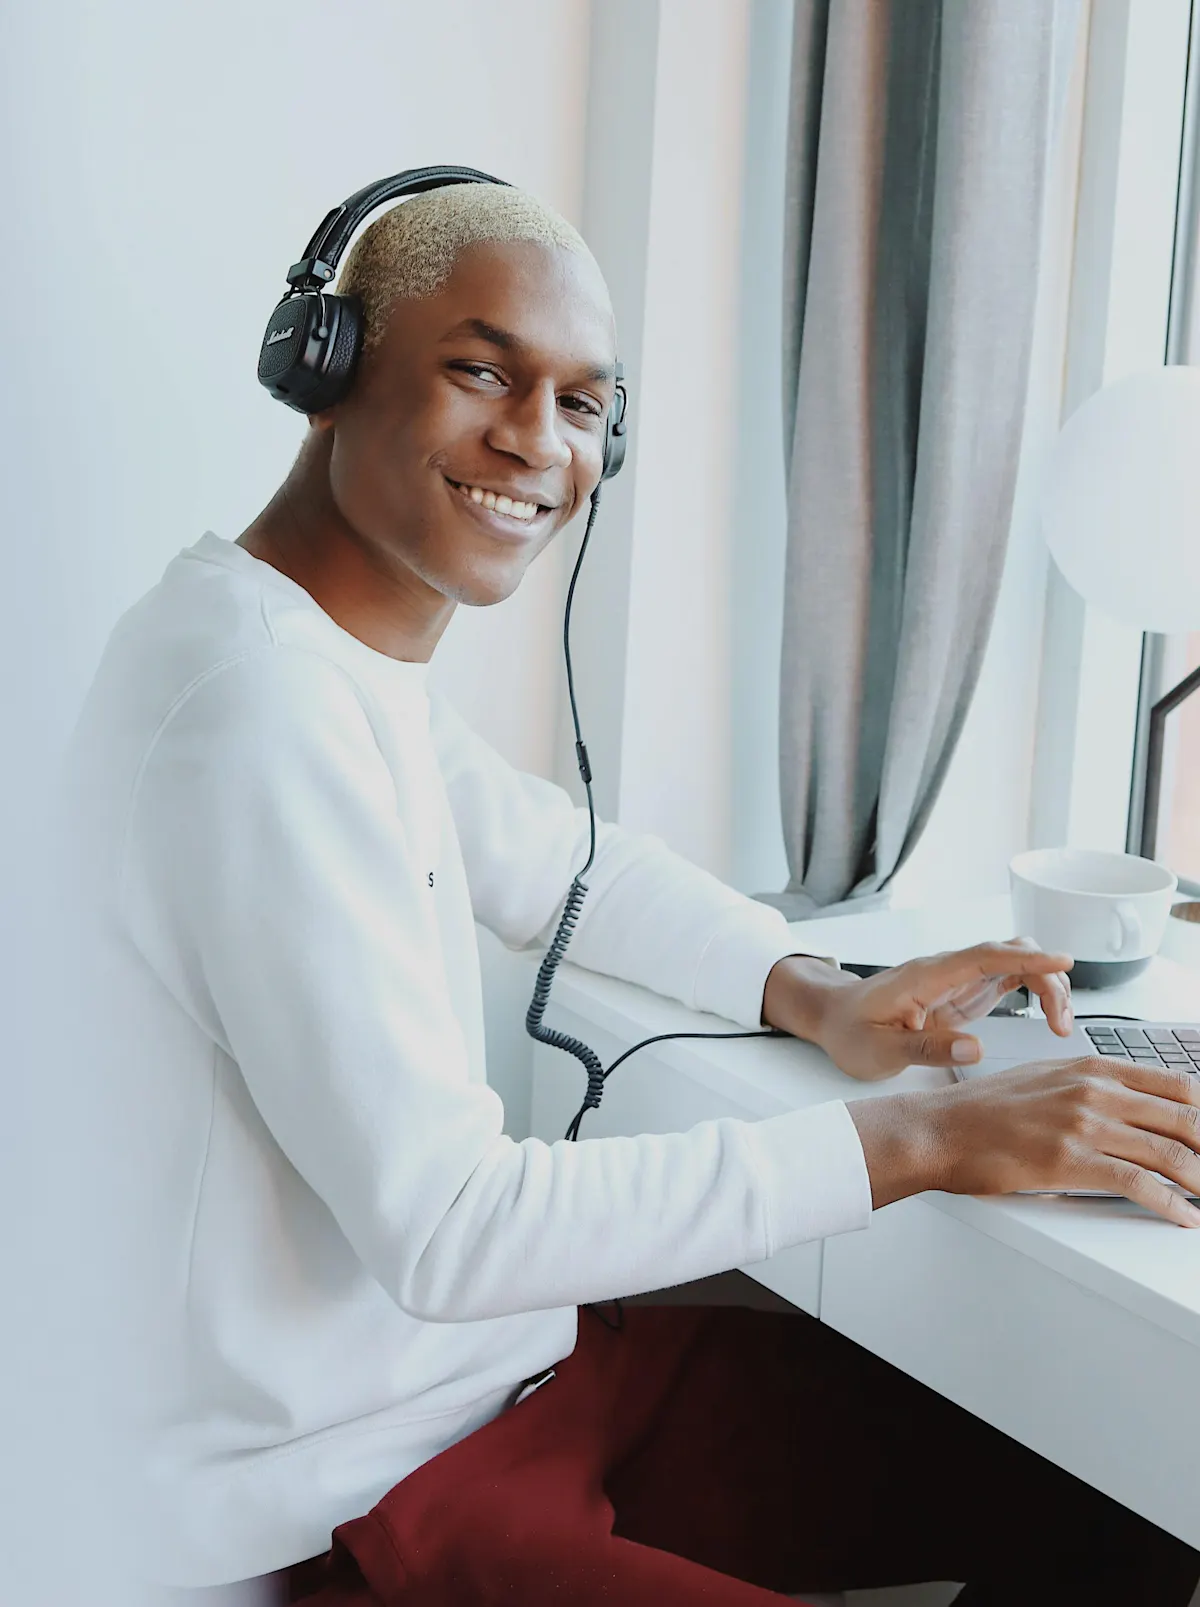 Man typing and smiling with headphones